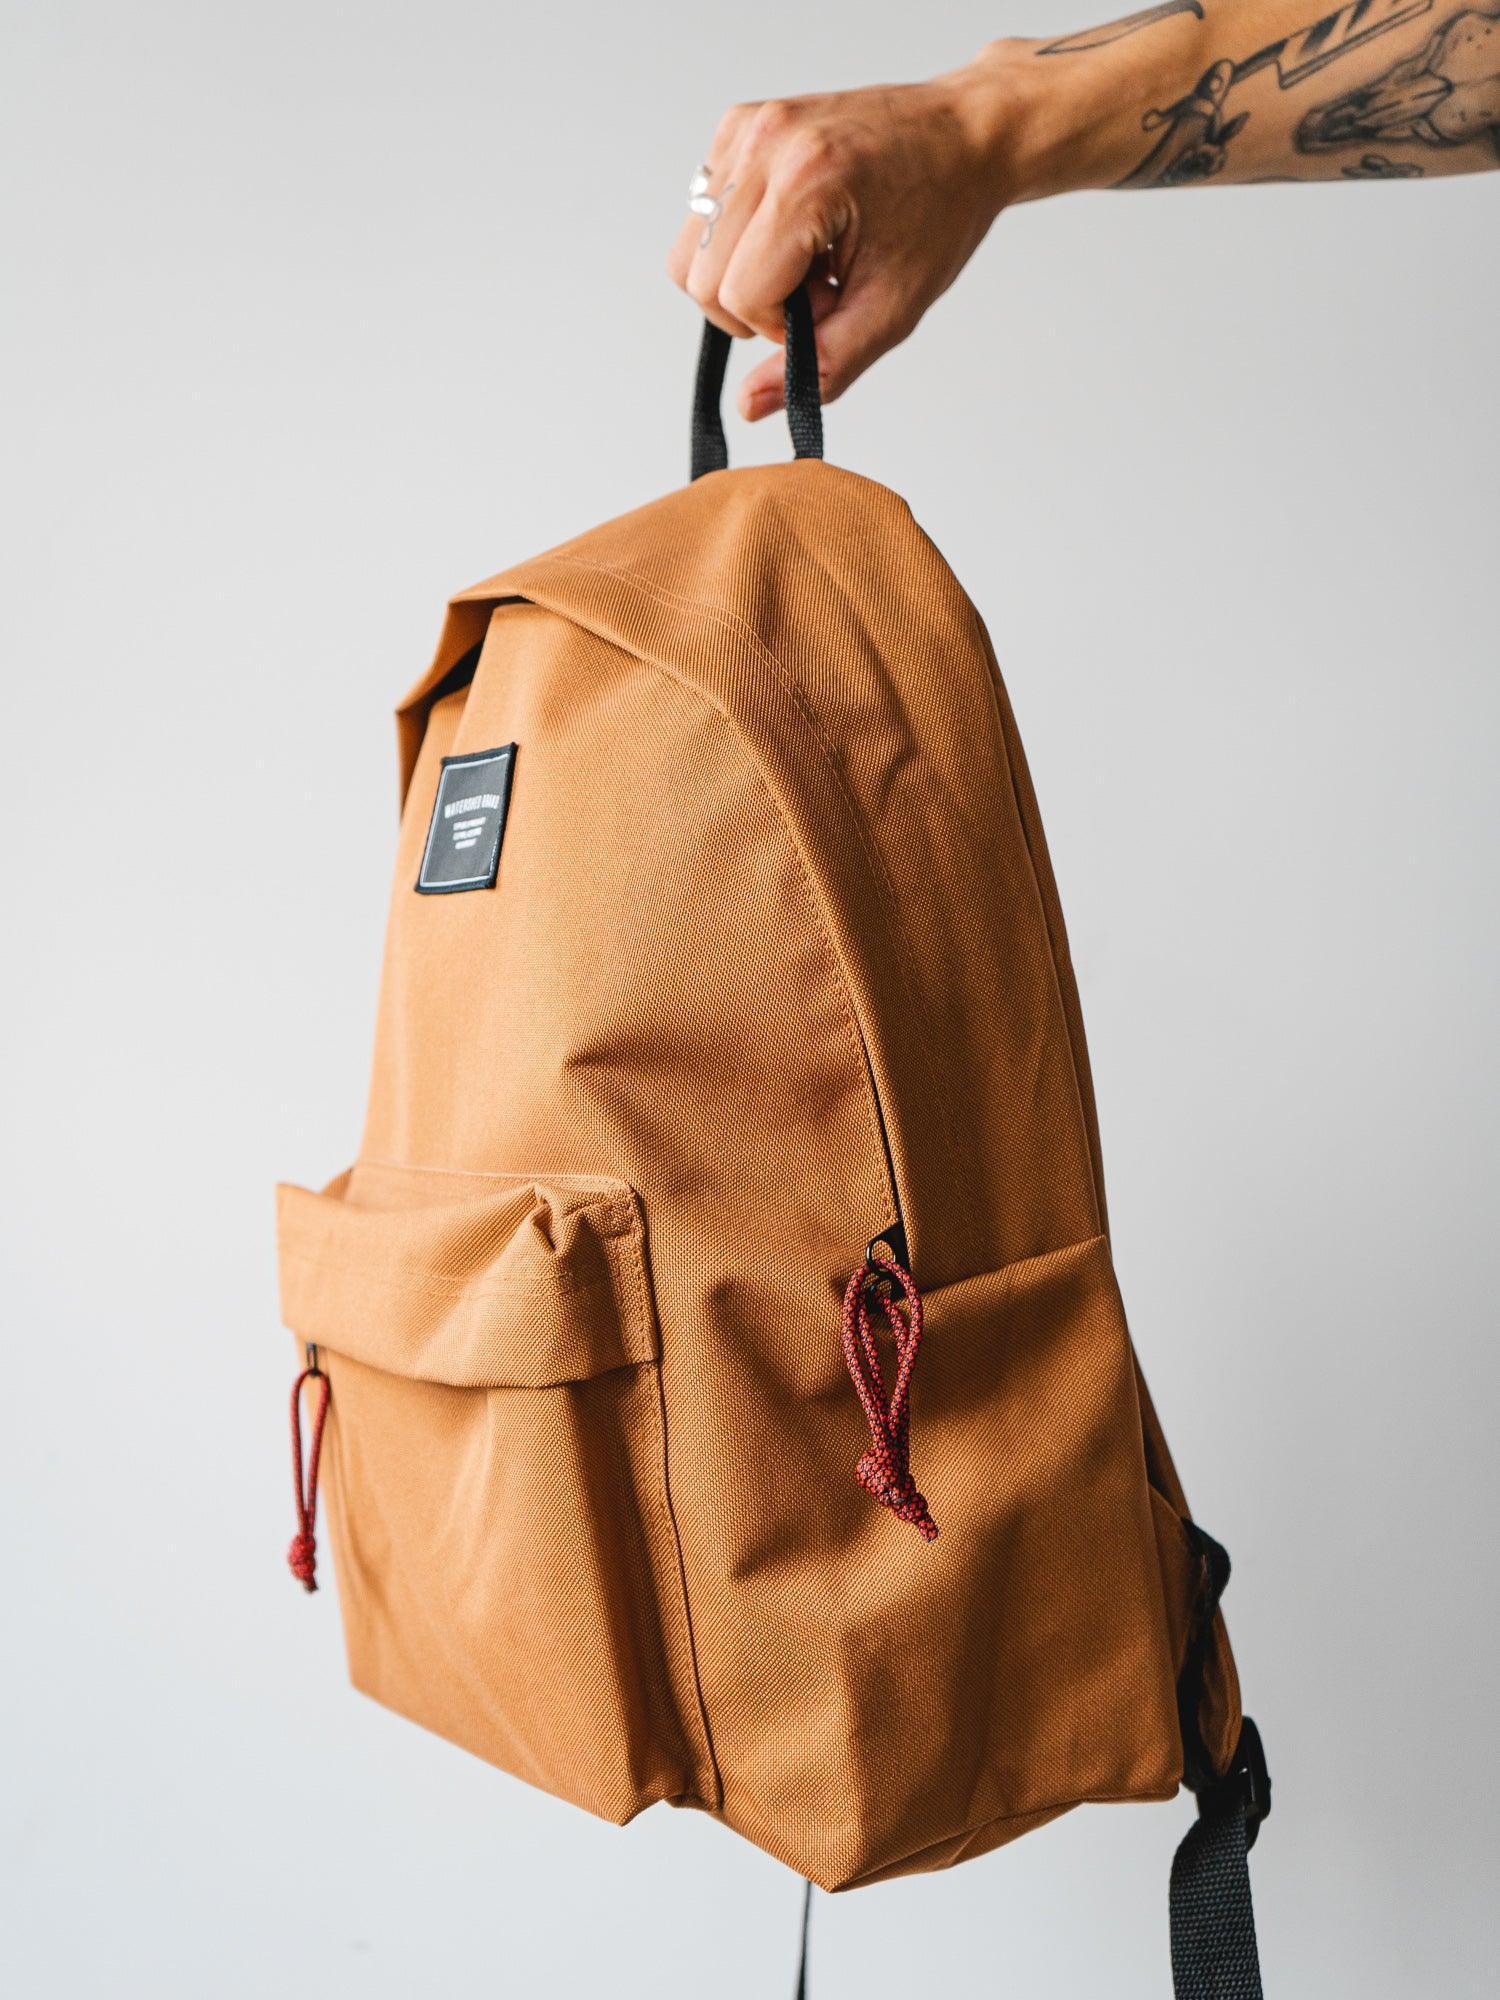 Union Backpack - Caramel - Watershed Brand